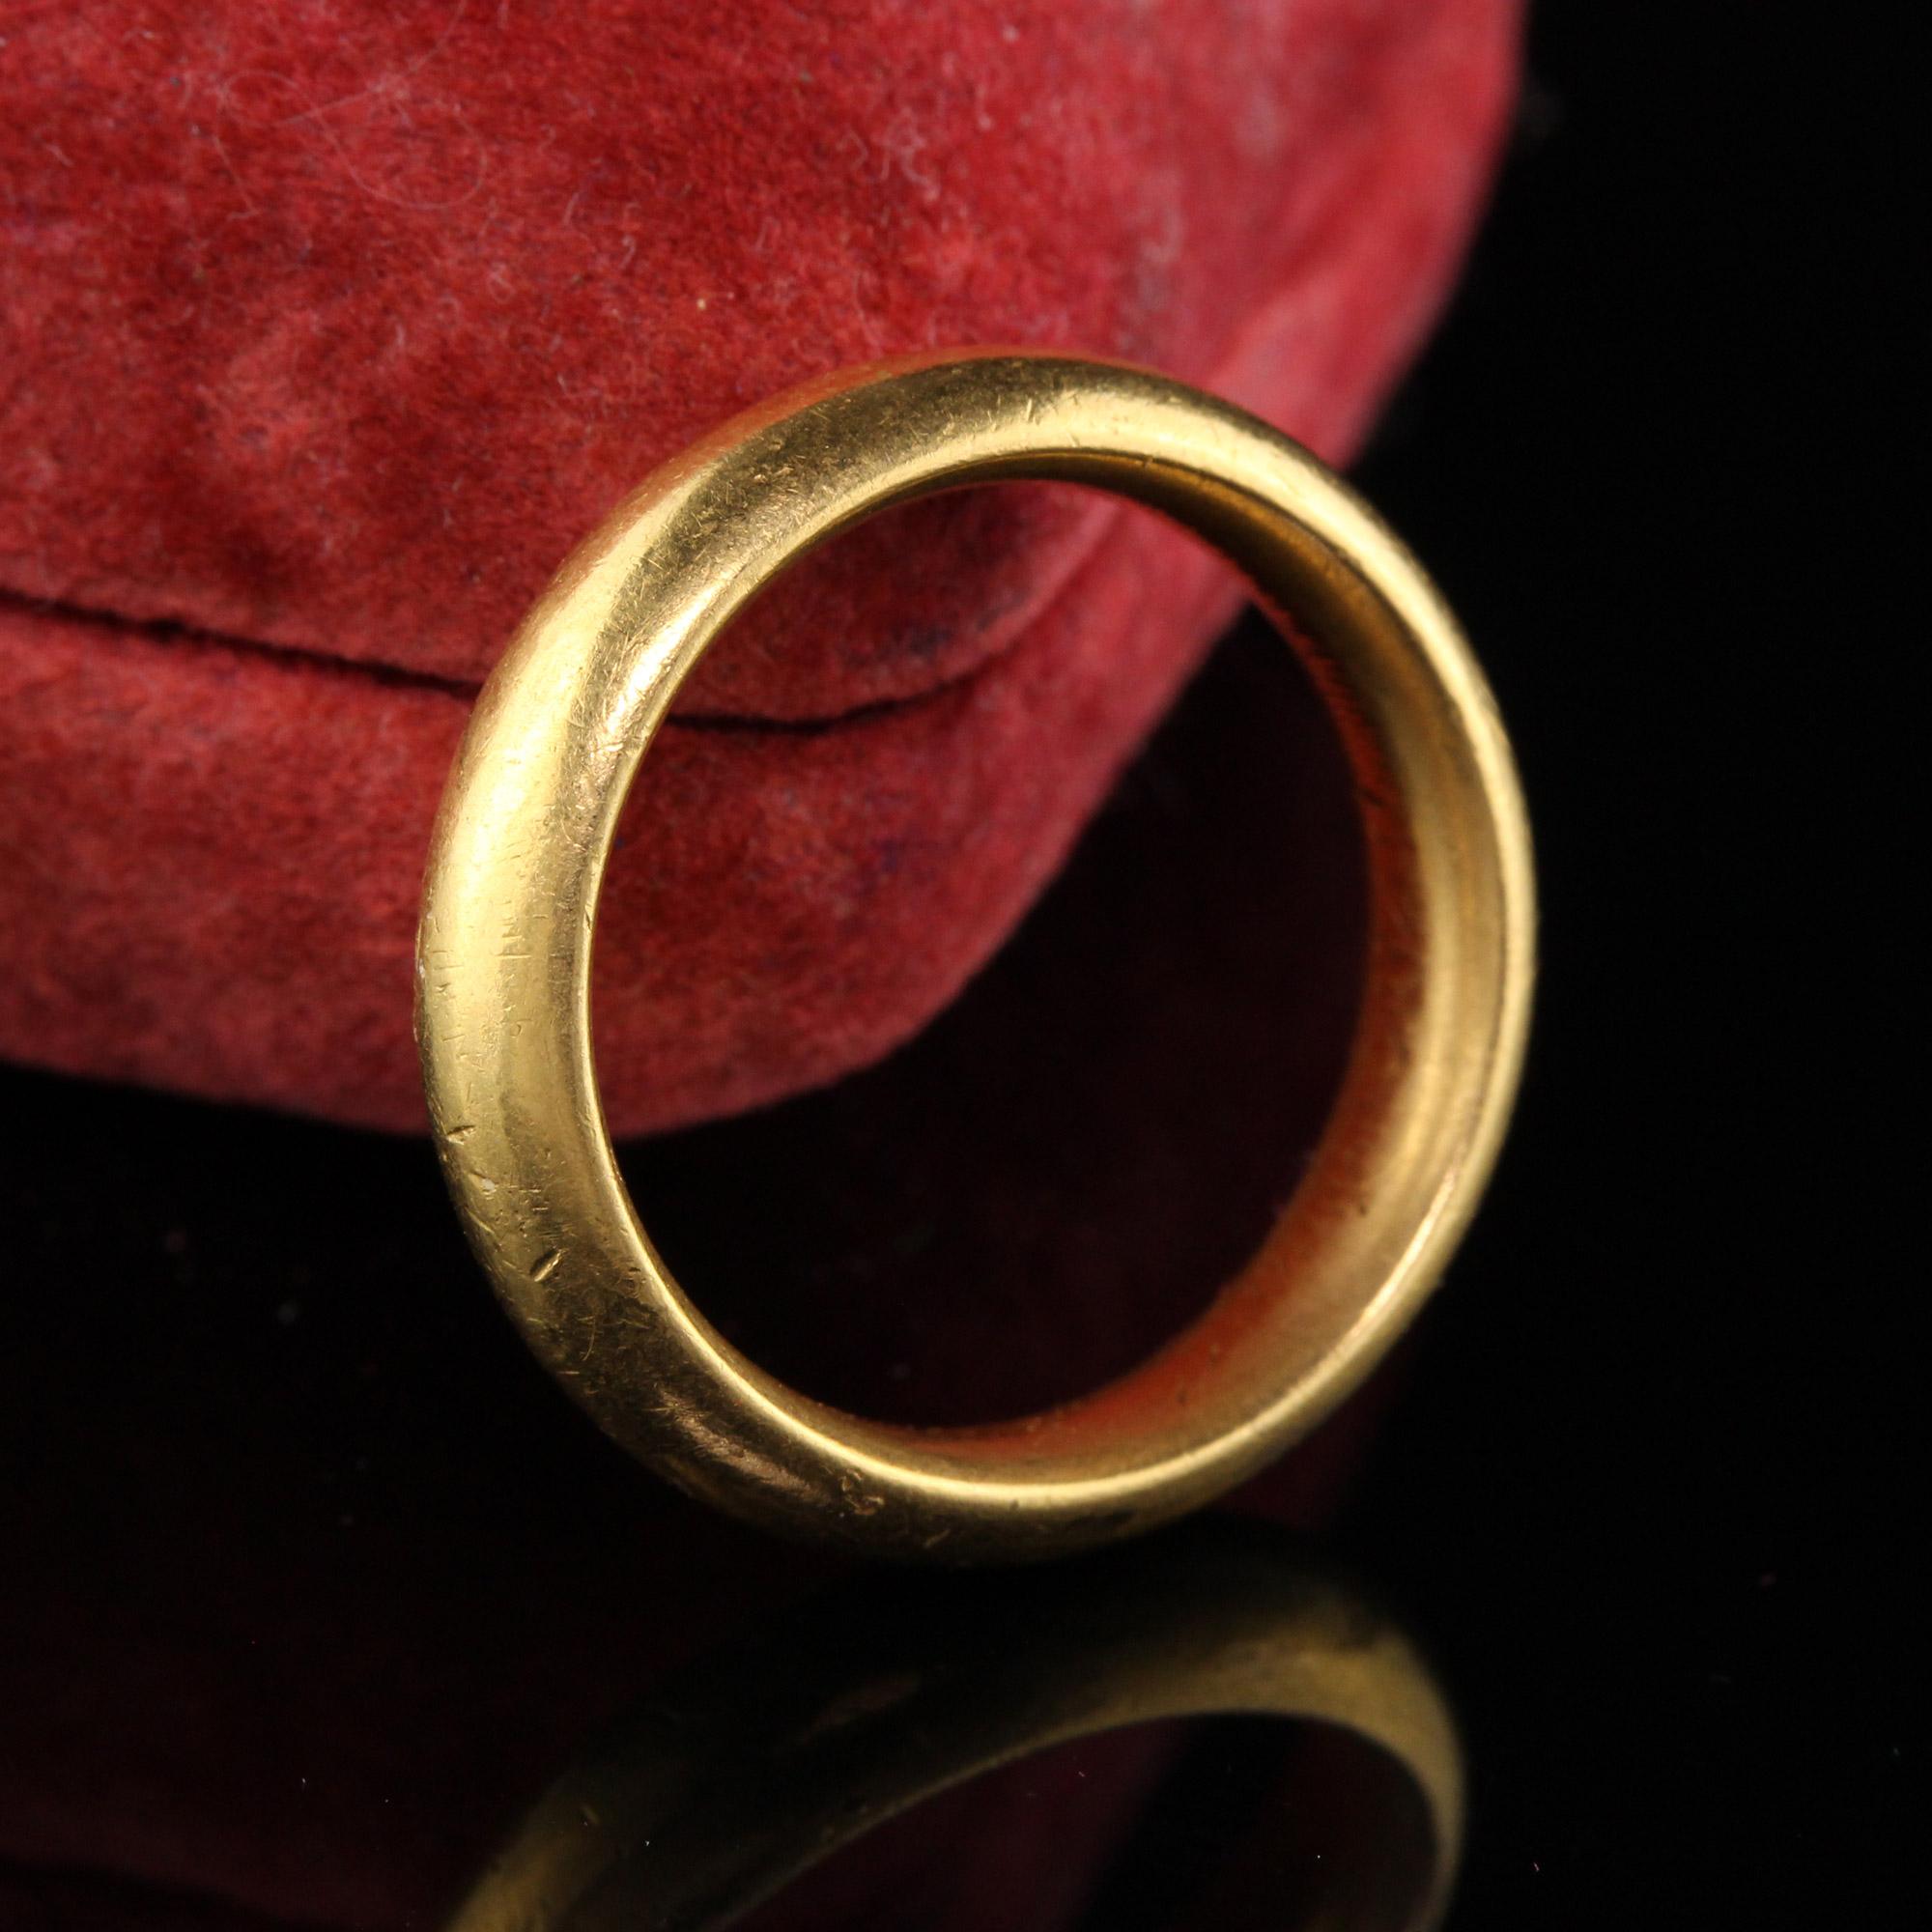 Beautiful Antique Victorian 18K Yellow Gold Plain Wide Engraved Wedding Band. This simple beautifully crafted band is thick and wide. The inside of the band is engraved but we can only make out the 